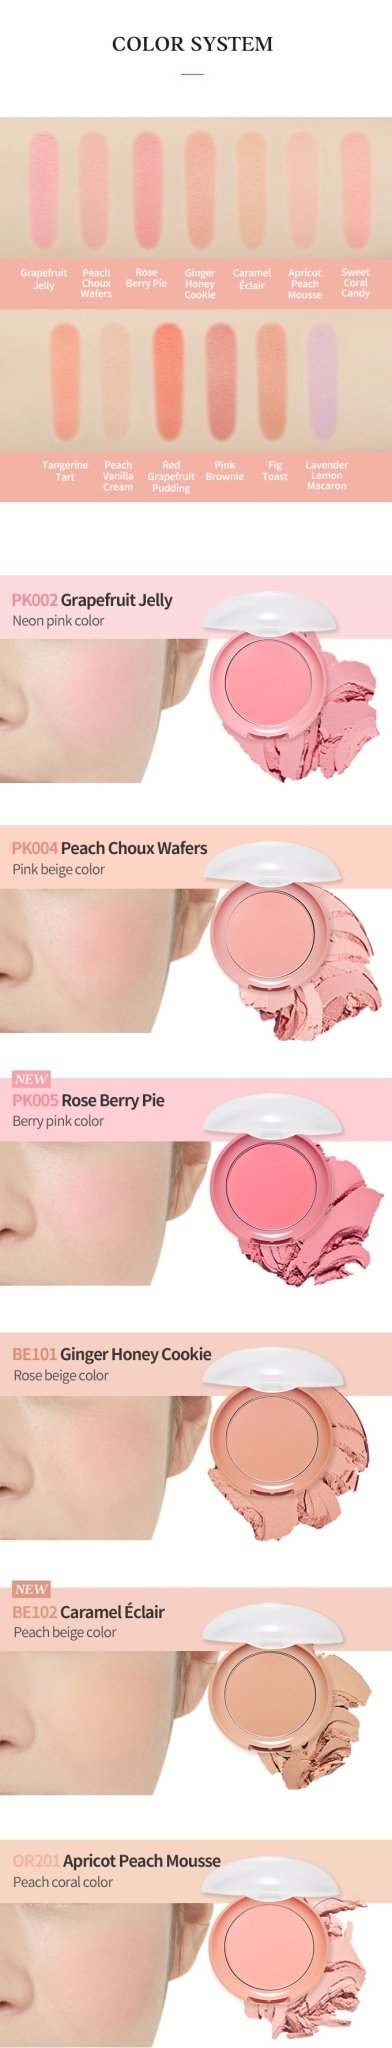 ETUDE HOUSE Lovely Cookie Blusher 4g - #BR401 Pink Brownie - OCEANBUY.ca